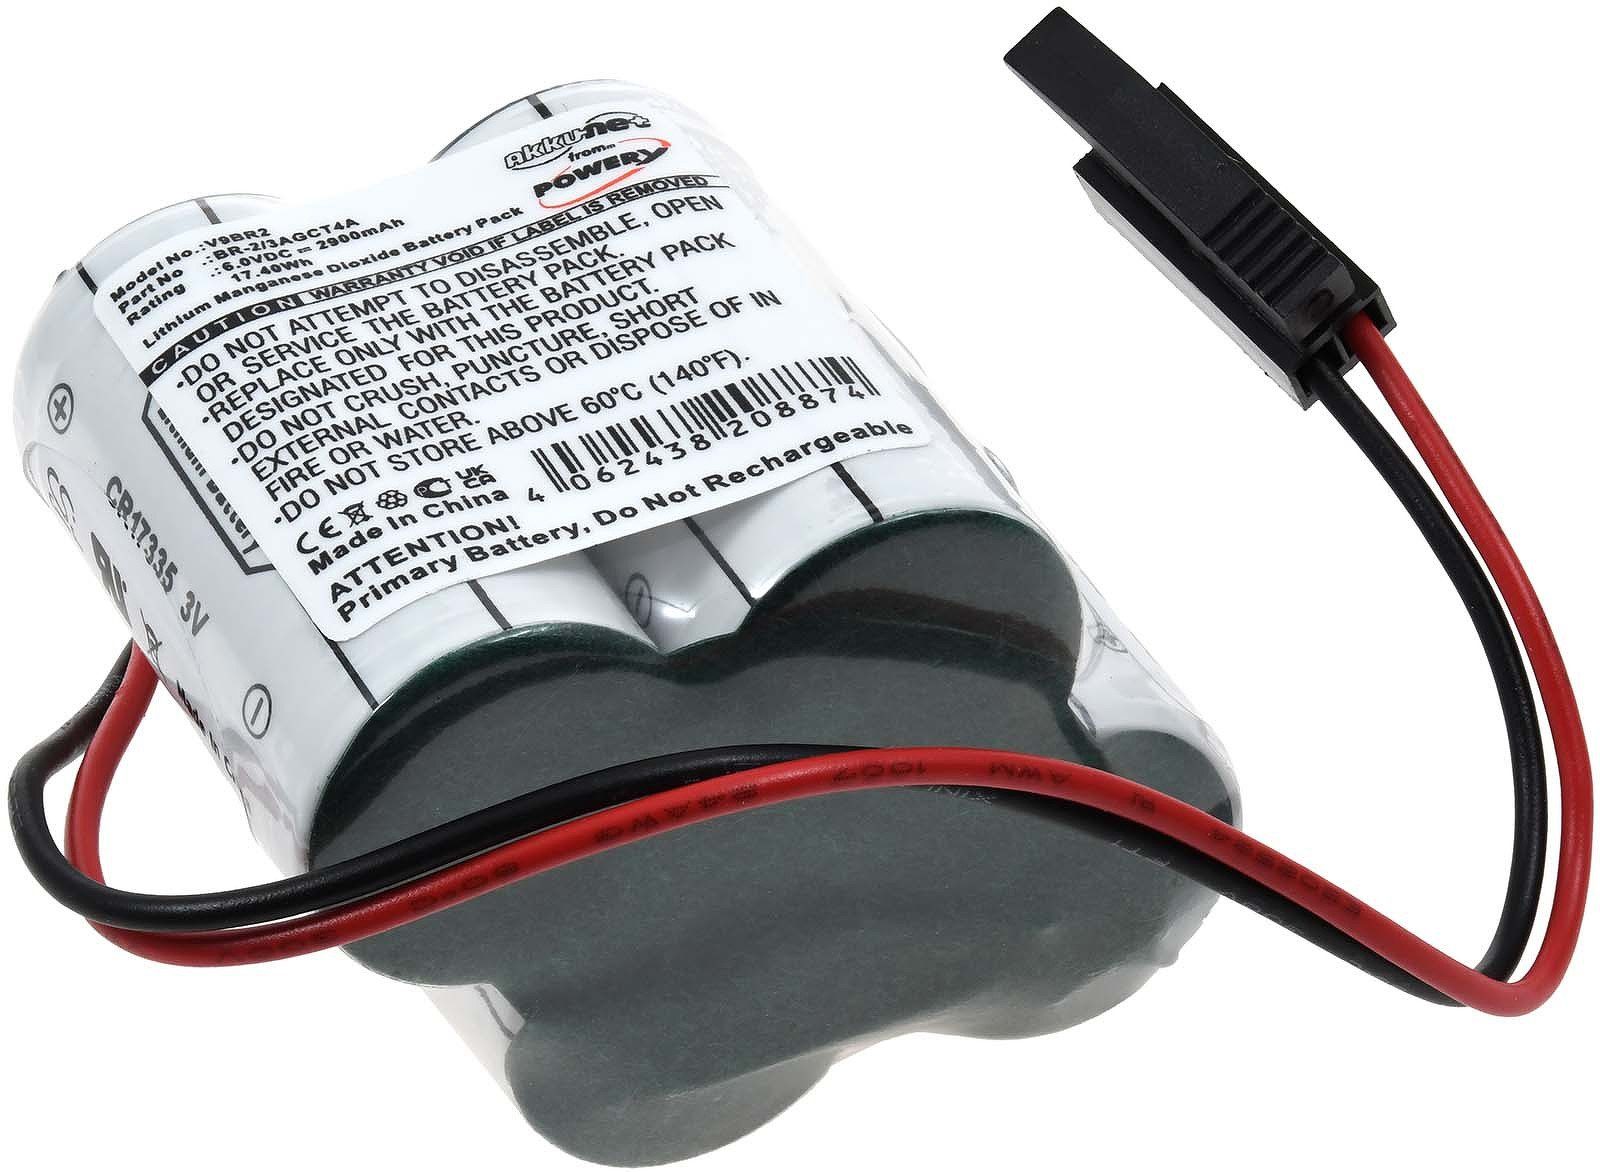 Powery SPS-Lithiumbatterie kompatibel mit Panasonic Typ BR-2/3AGCT4A Batterie, (6 V)